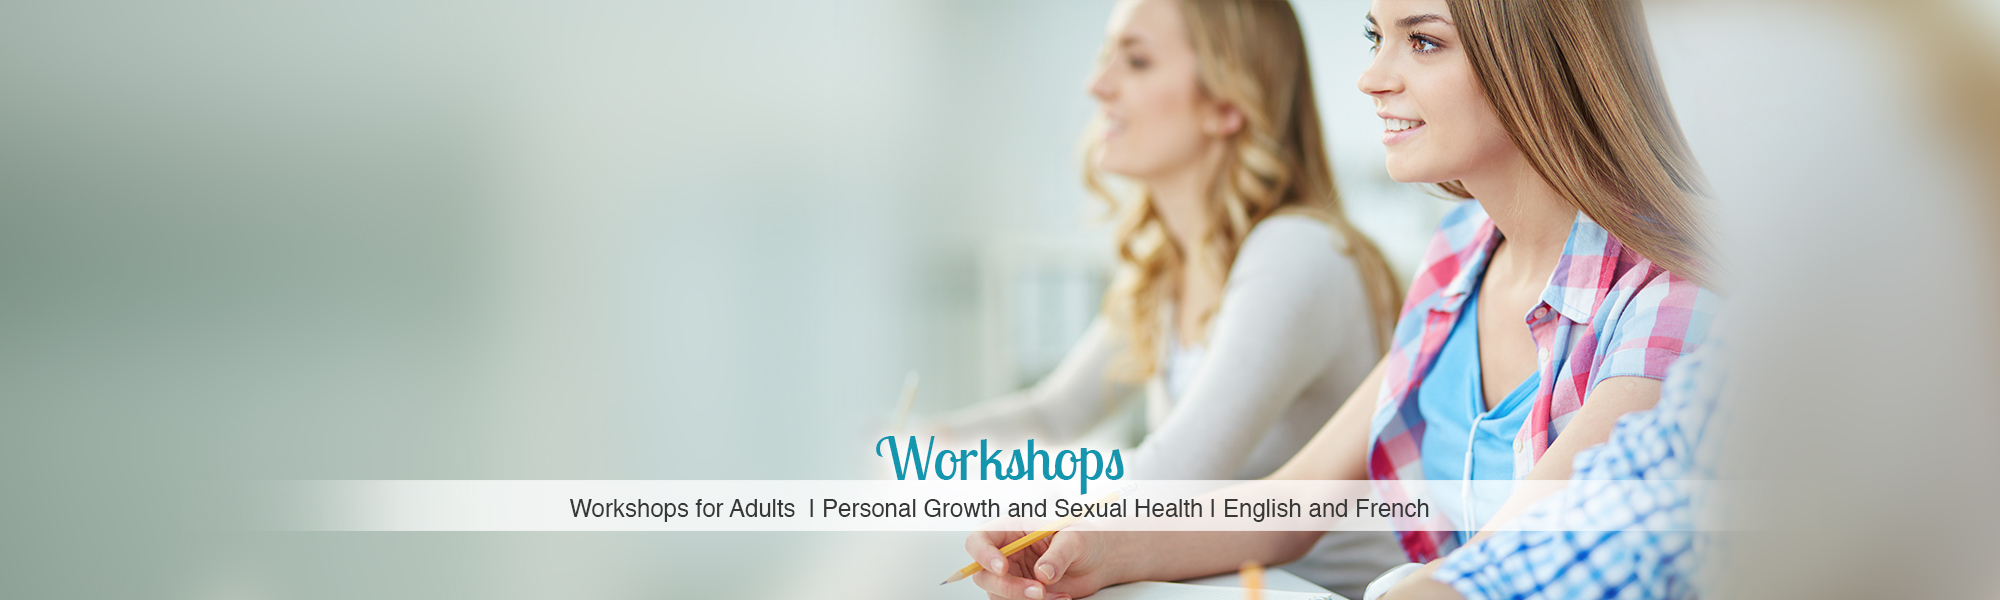 Workshops: Workshops for Adults | Personal Growth and Sexual Health | English and French